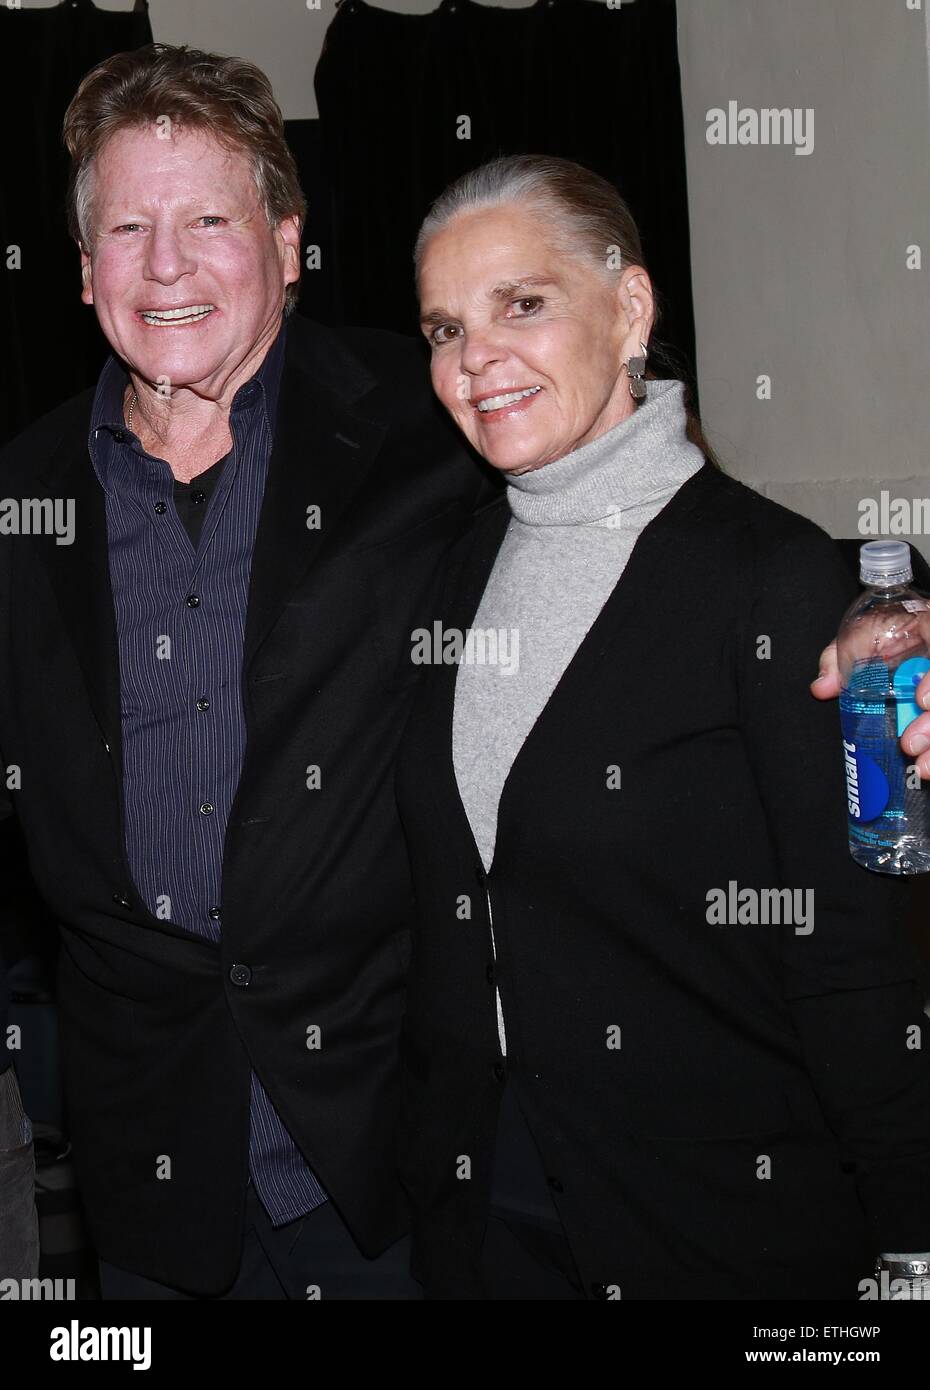 The stars of the 1970 film Love Story reunite during rehearsals for the upcoming tour production of Love Letters, at Shetler Studios.  Featuring: Ryan O'Neal, Ali MacGraw Where: New York, New York, United States When: 24 Feb 2015 Credit: Joseph Marzullo/WENN.com Stock Photo